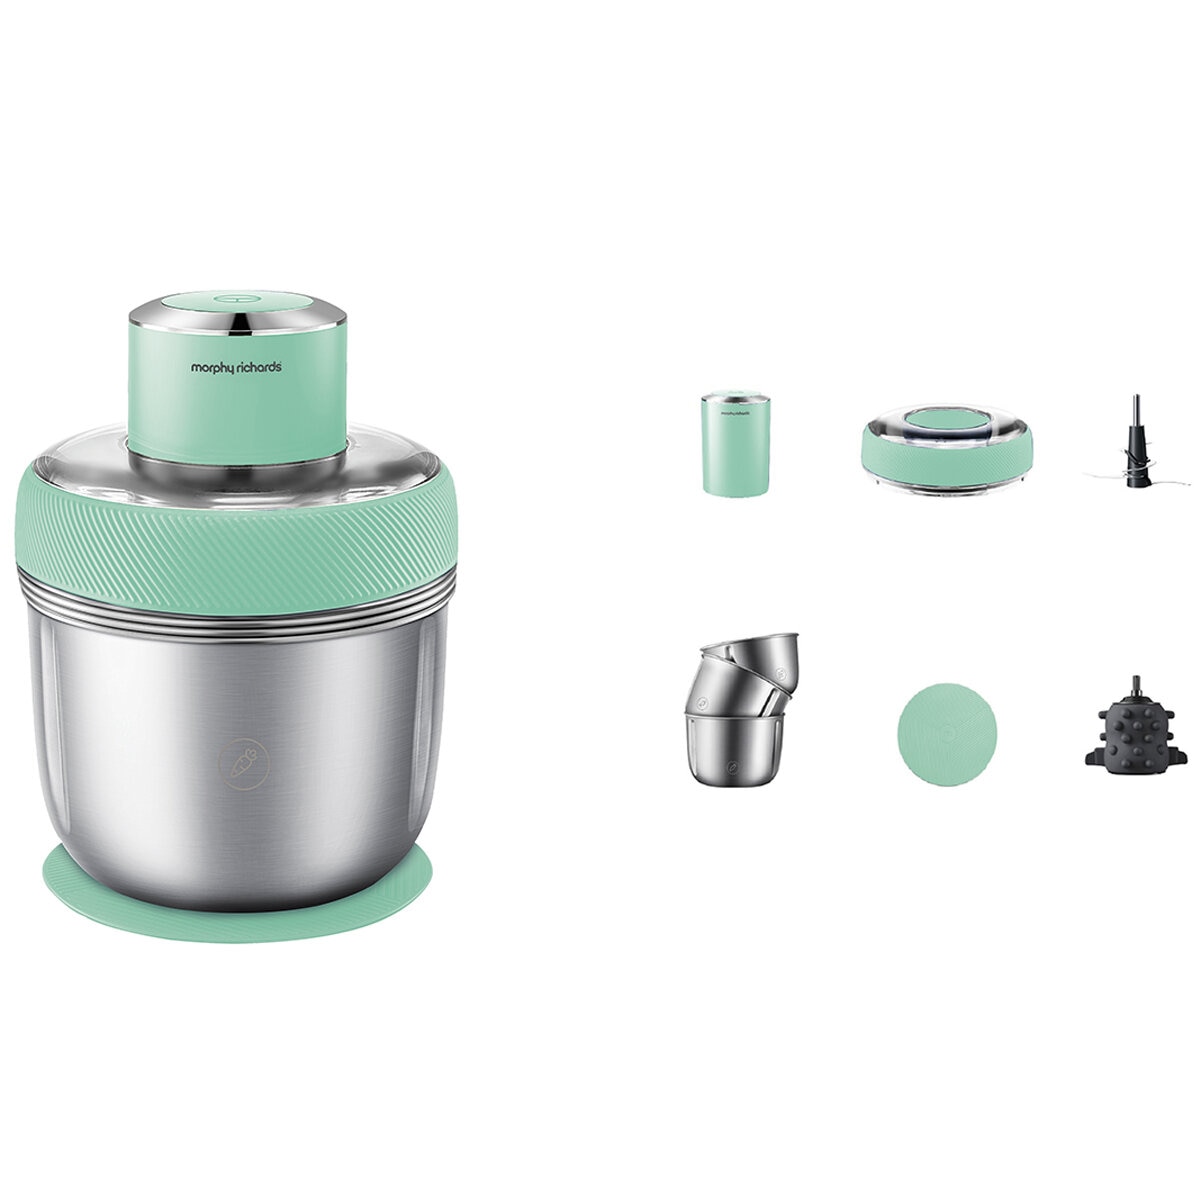 Morphy Richards Electric Chopper with 3 bowls + Accessories Spearmint Green MRCH35SG